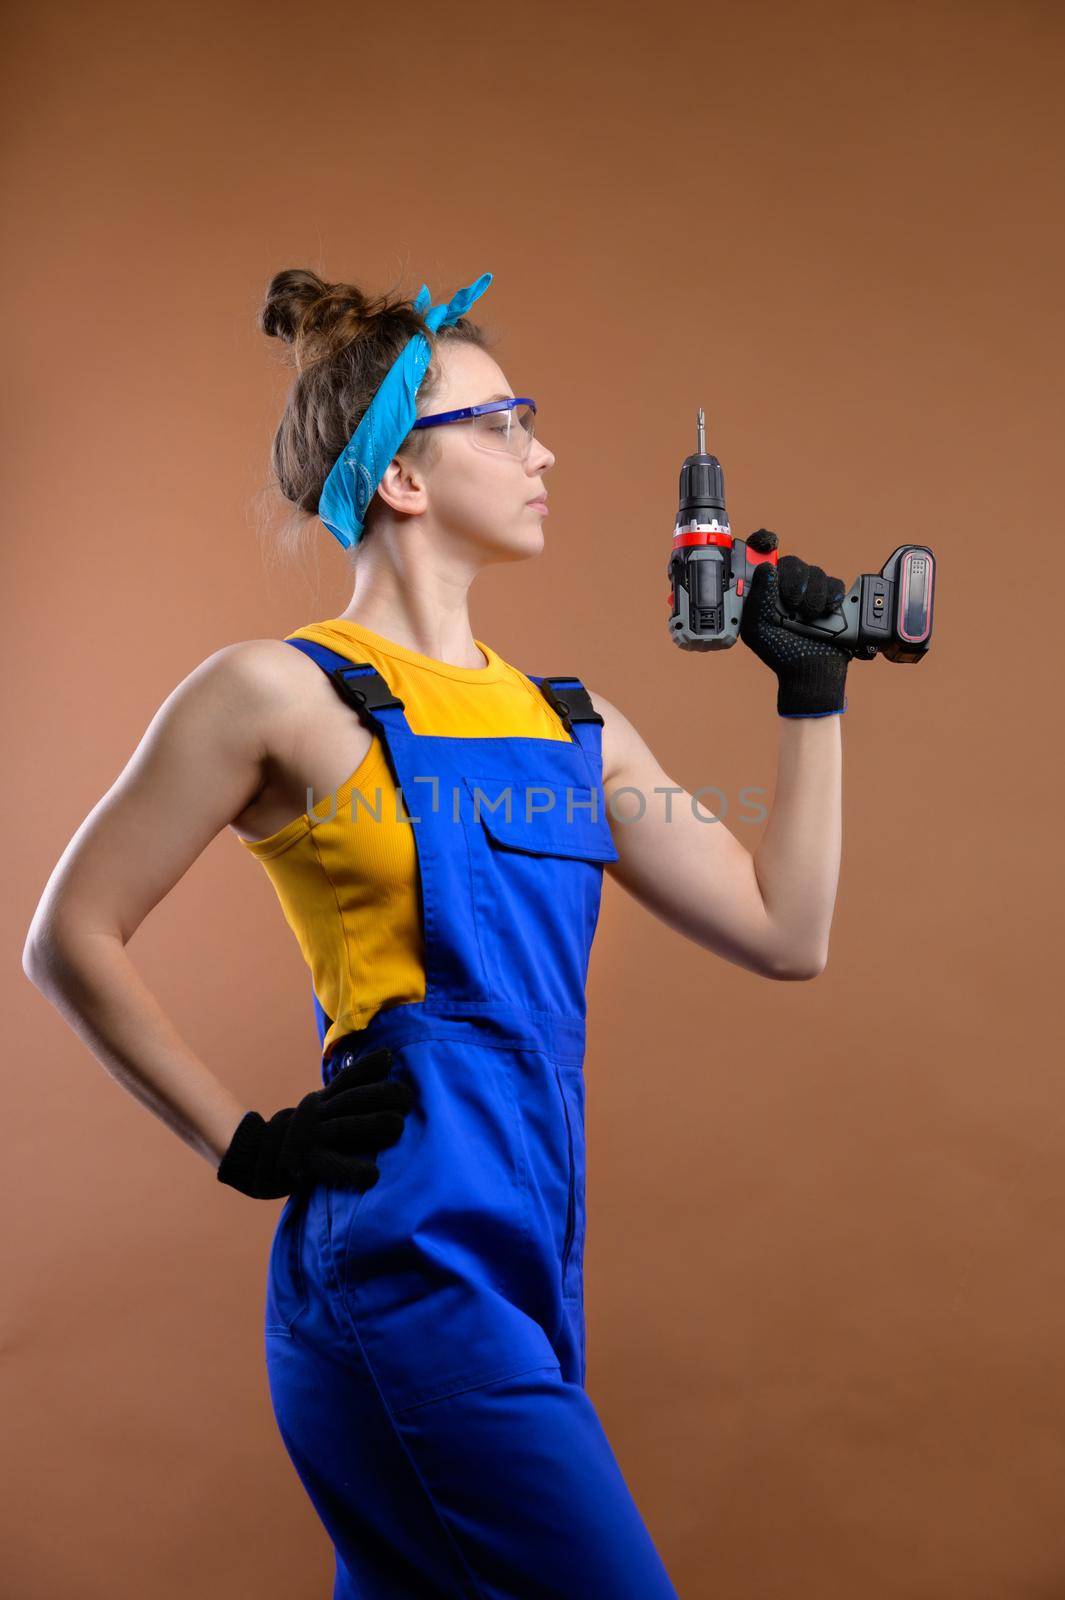 Young woman repairman in overalls and goggles works with a screwdriver in the studio on a brown background. Focus on the screwdriver. Copy space.